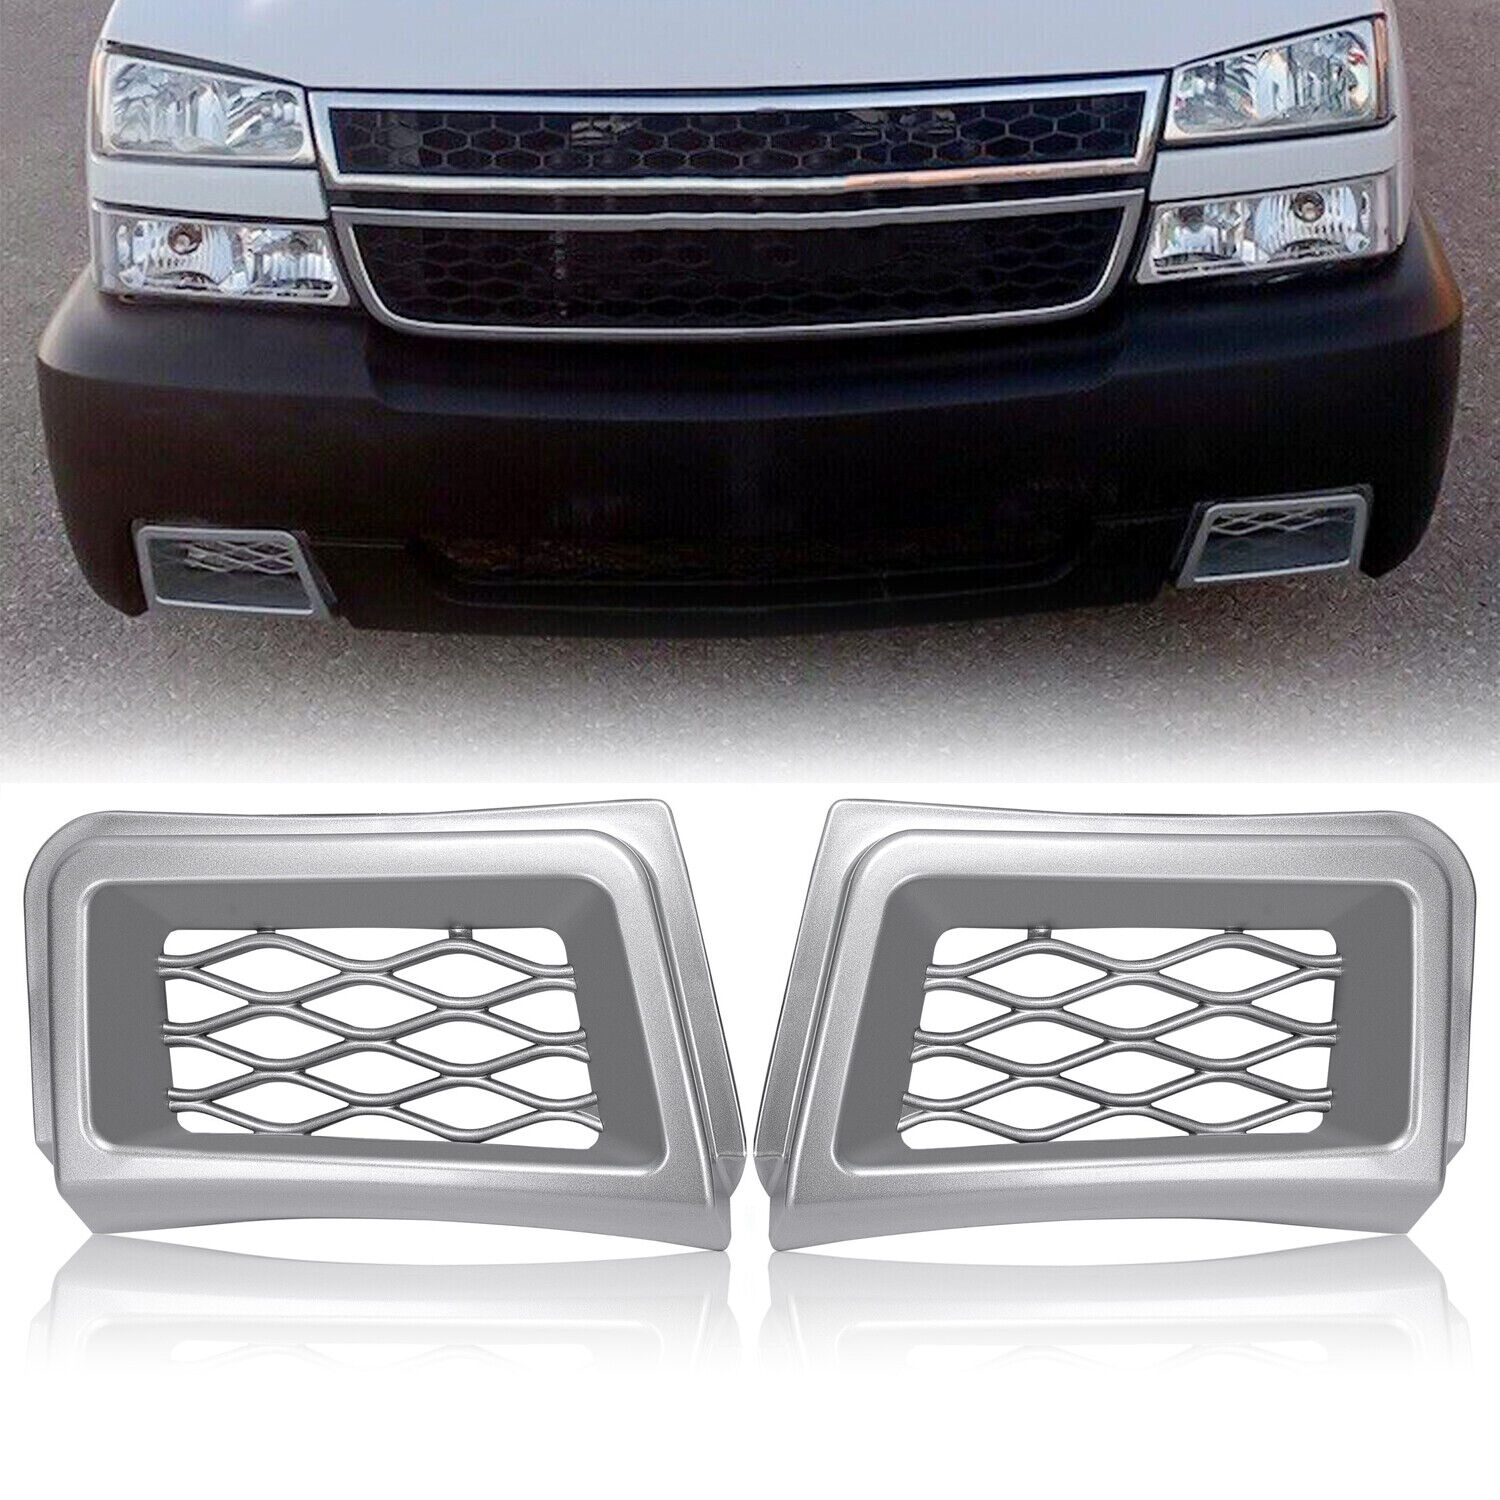 For 03-07 Chevy Silverado SS-Style Bumper Caliper Air Duct Grille Grill Cover